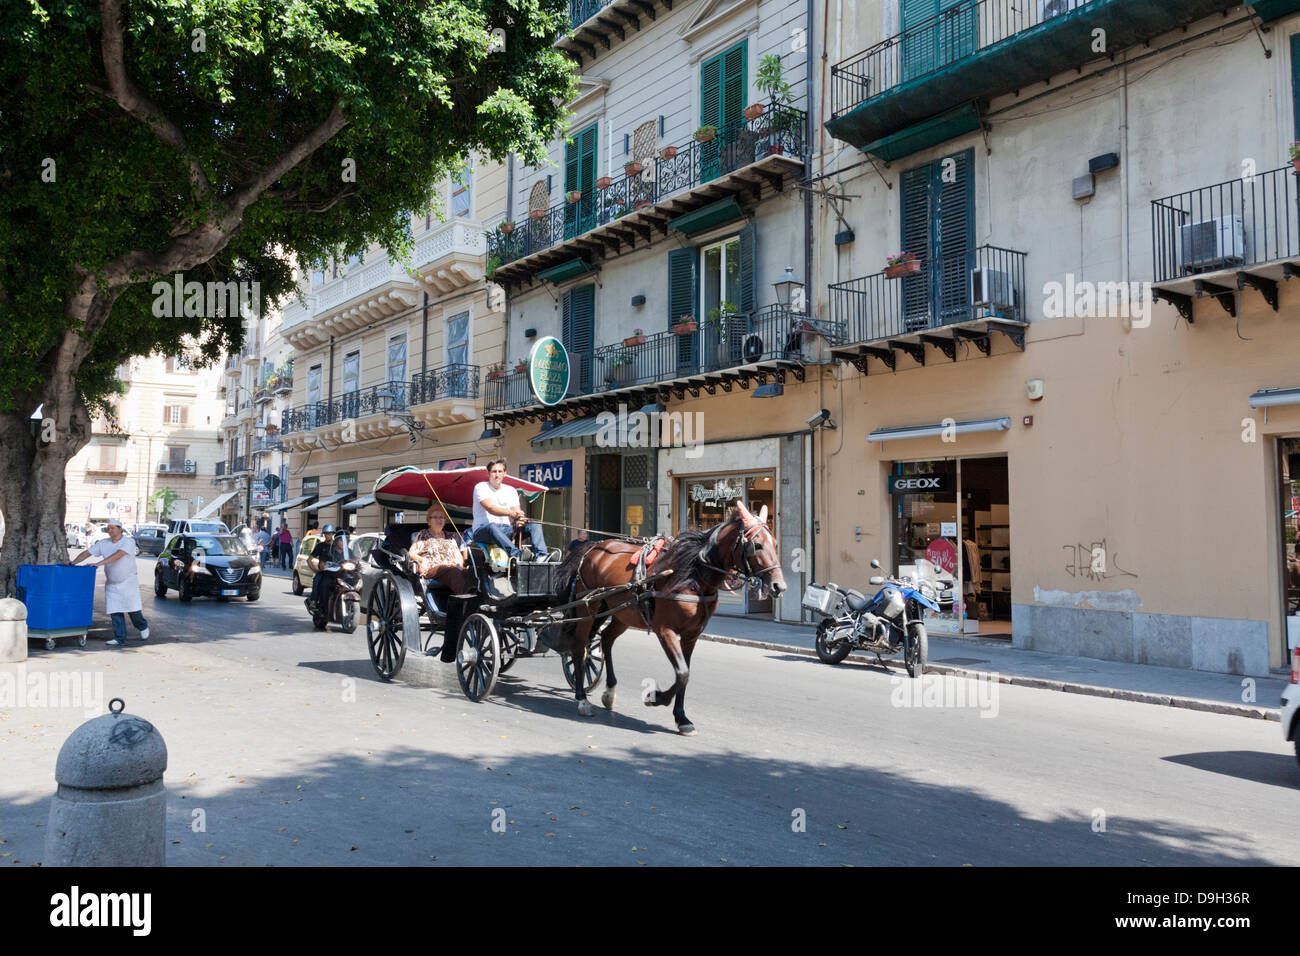 Horse drawn carriage, Sightseeing tour, Palermo, Sicily, Italy Stock Photo  - Alamy